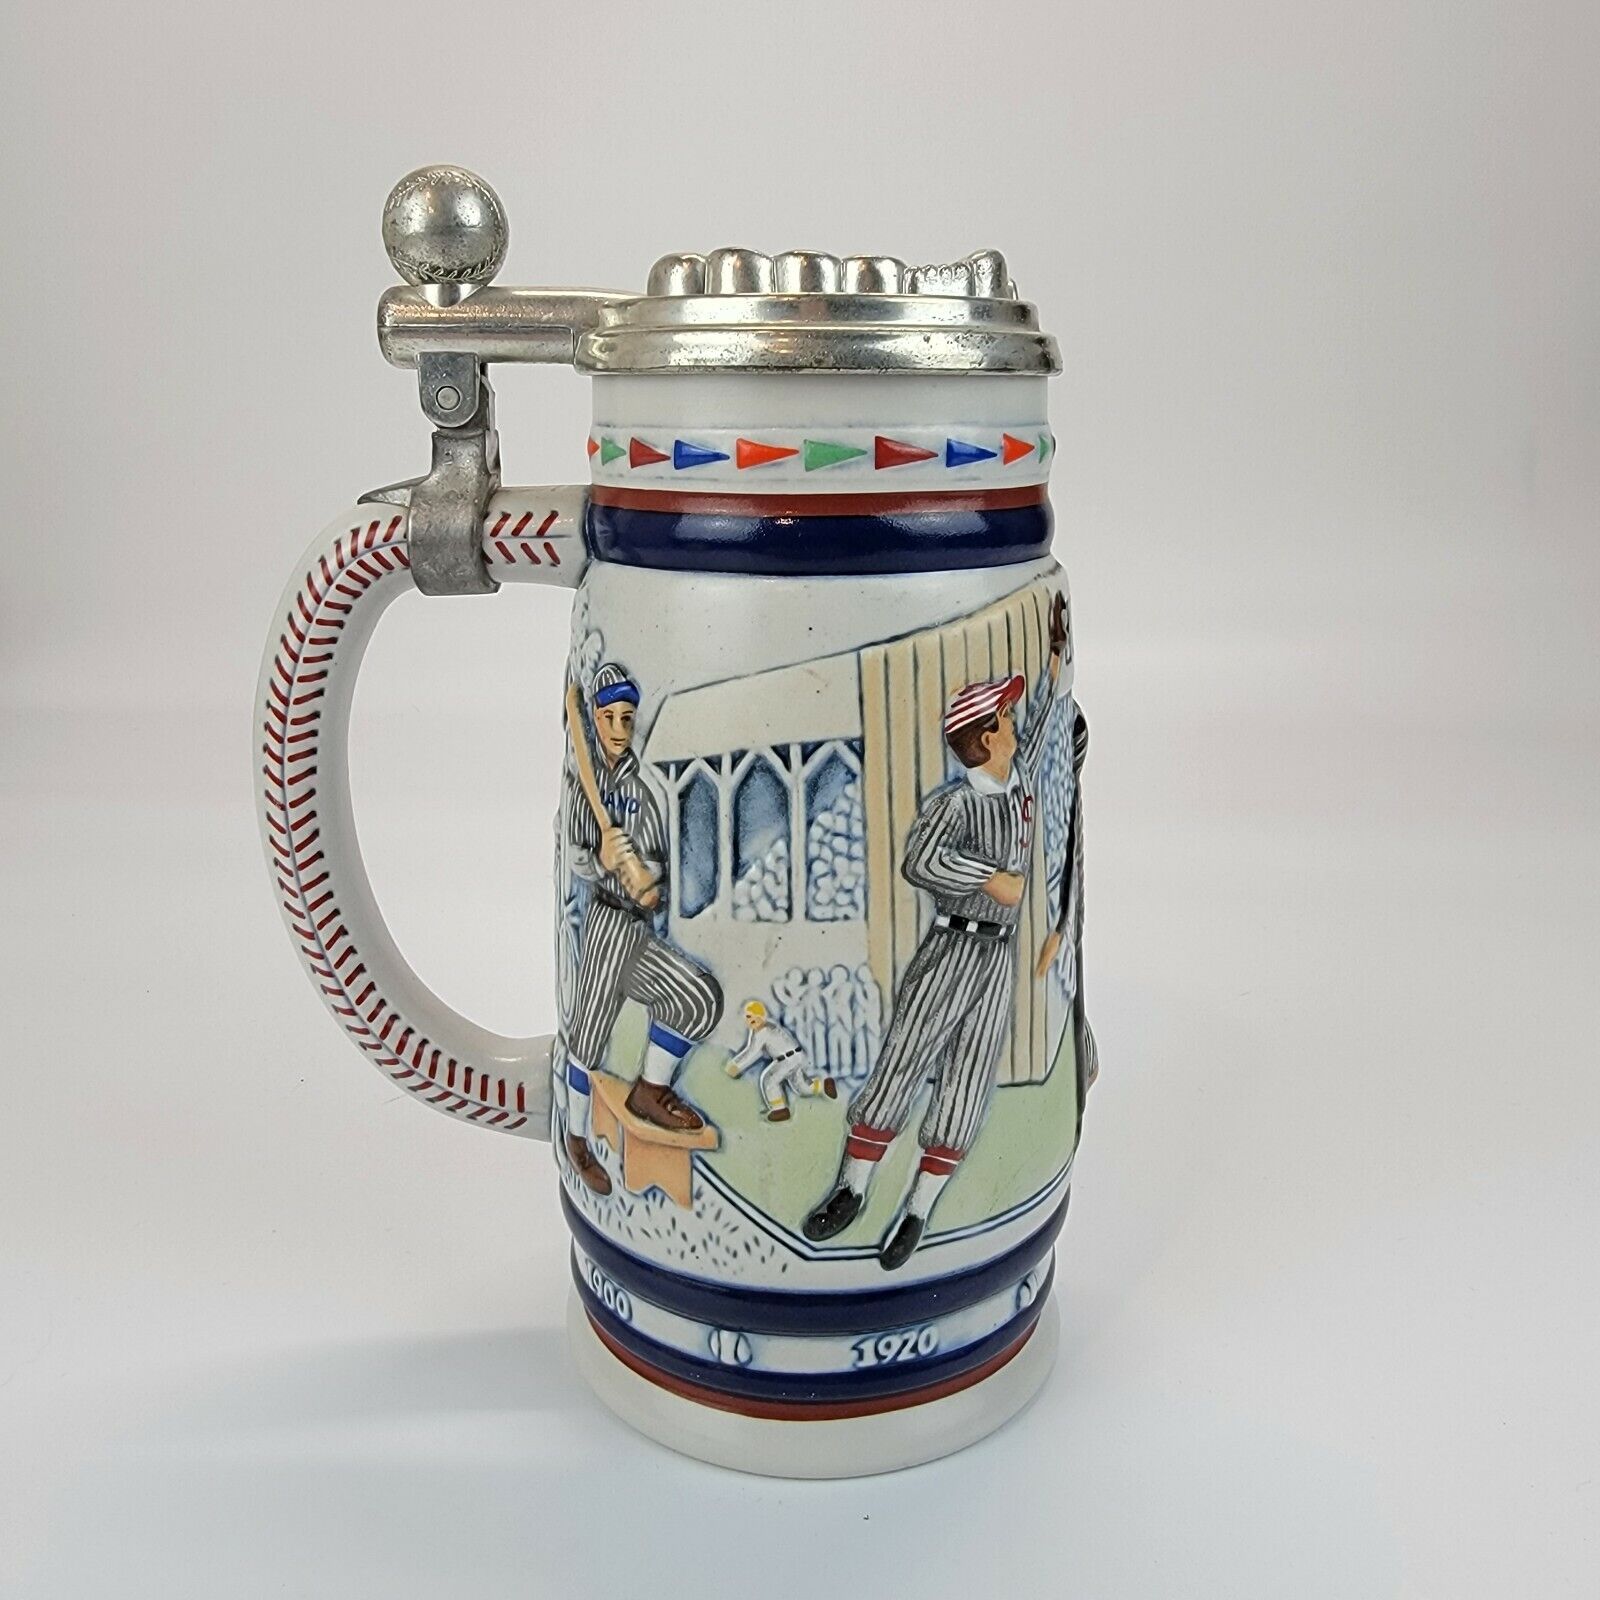 Avon History of Baseball Beer Stein with Lid - Ceramarte Brazil 1984 Handcrafted